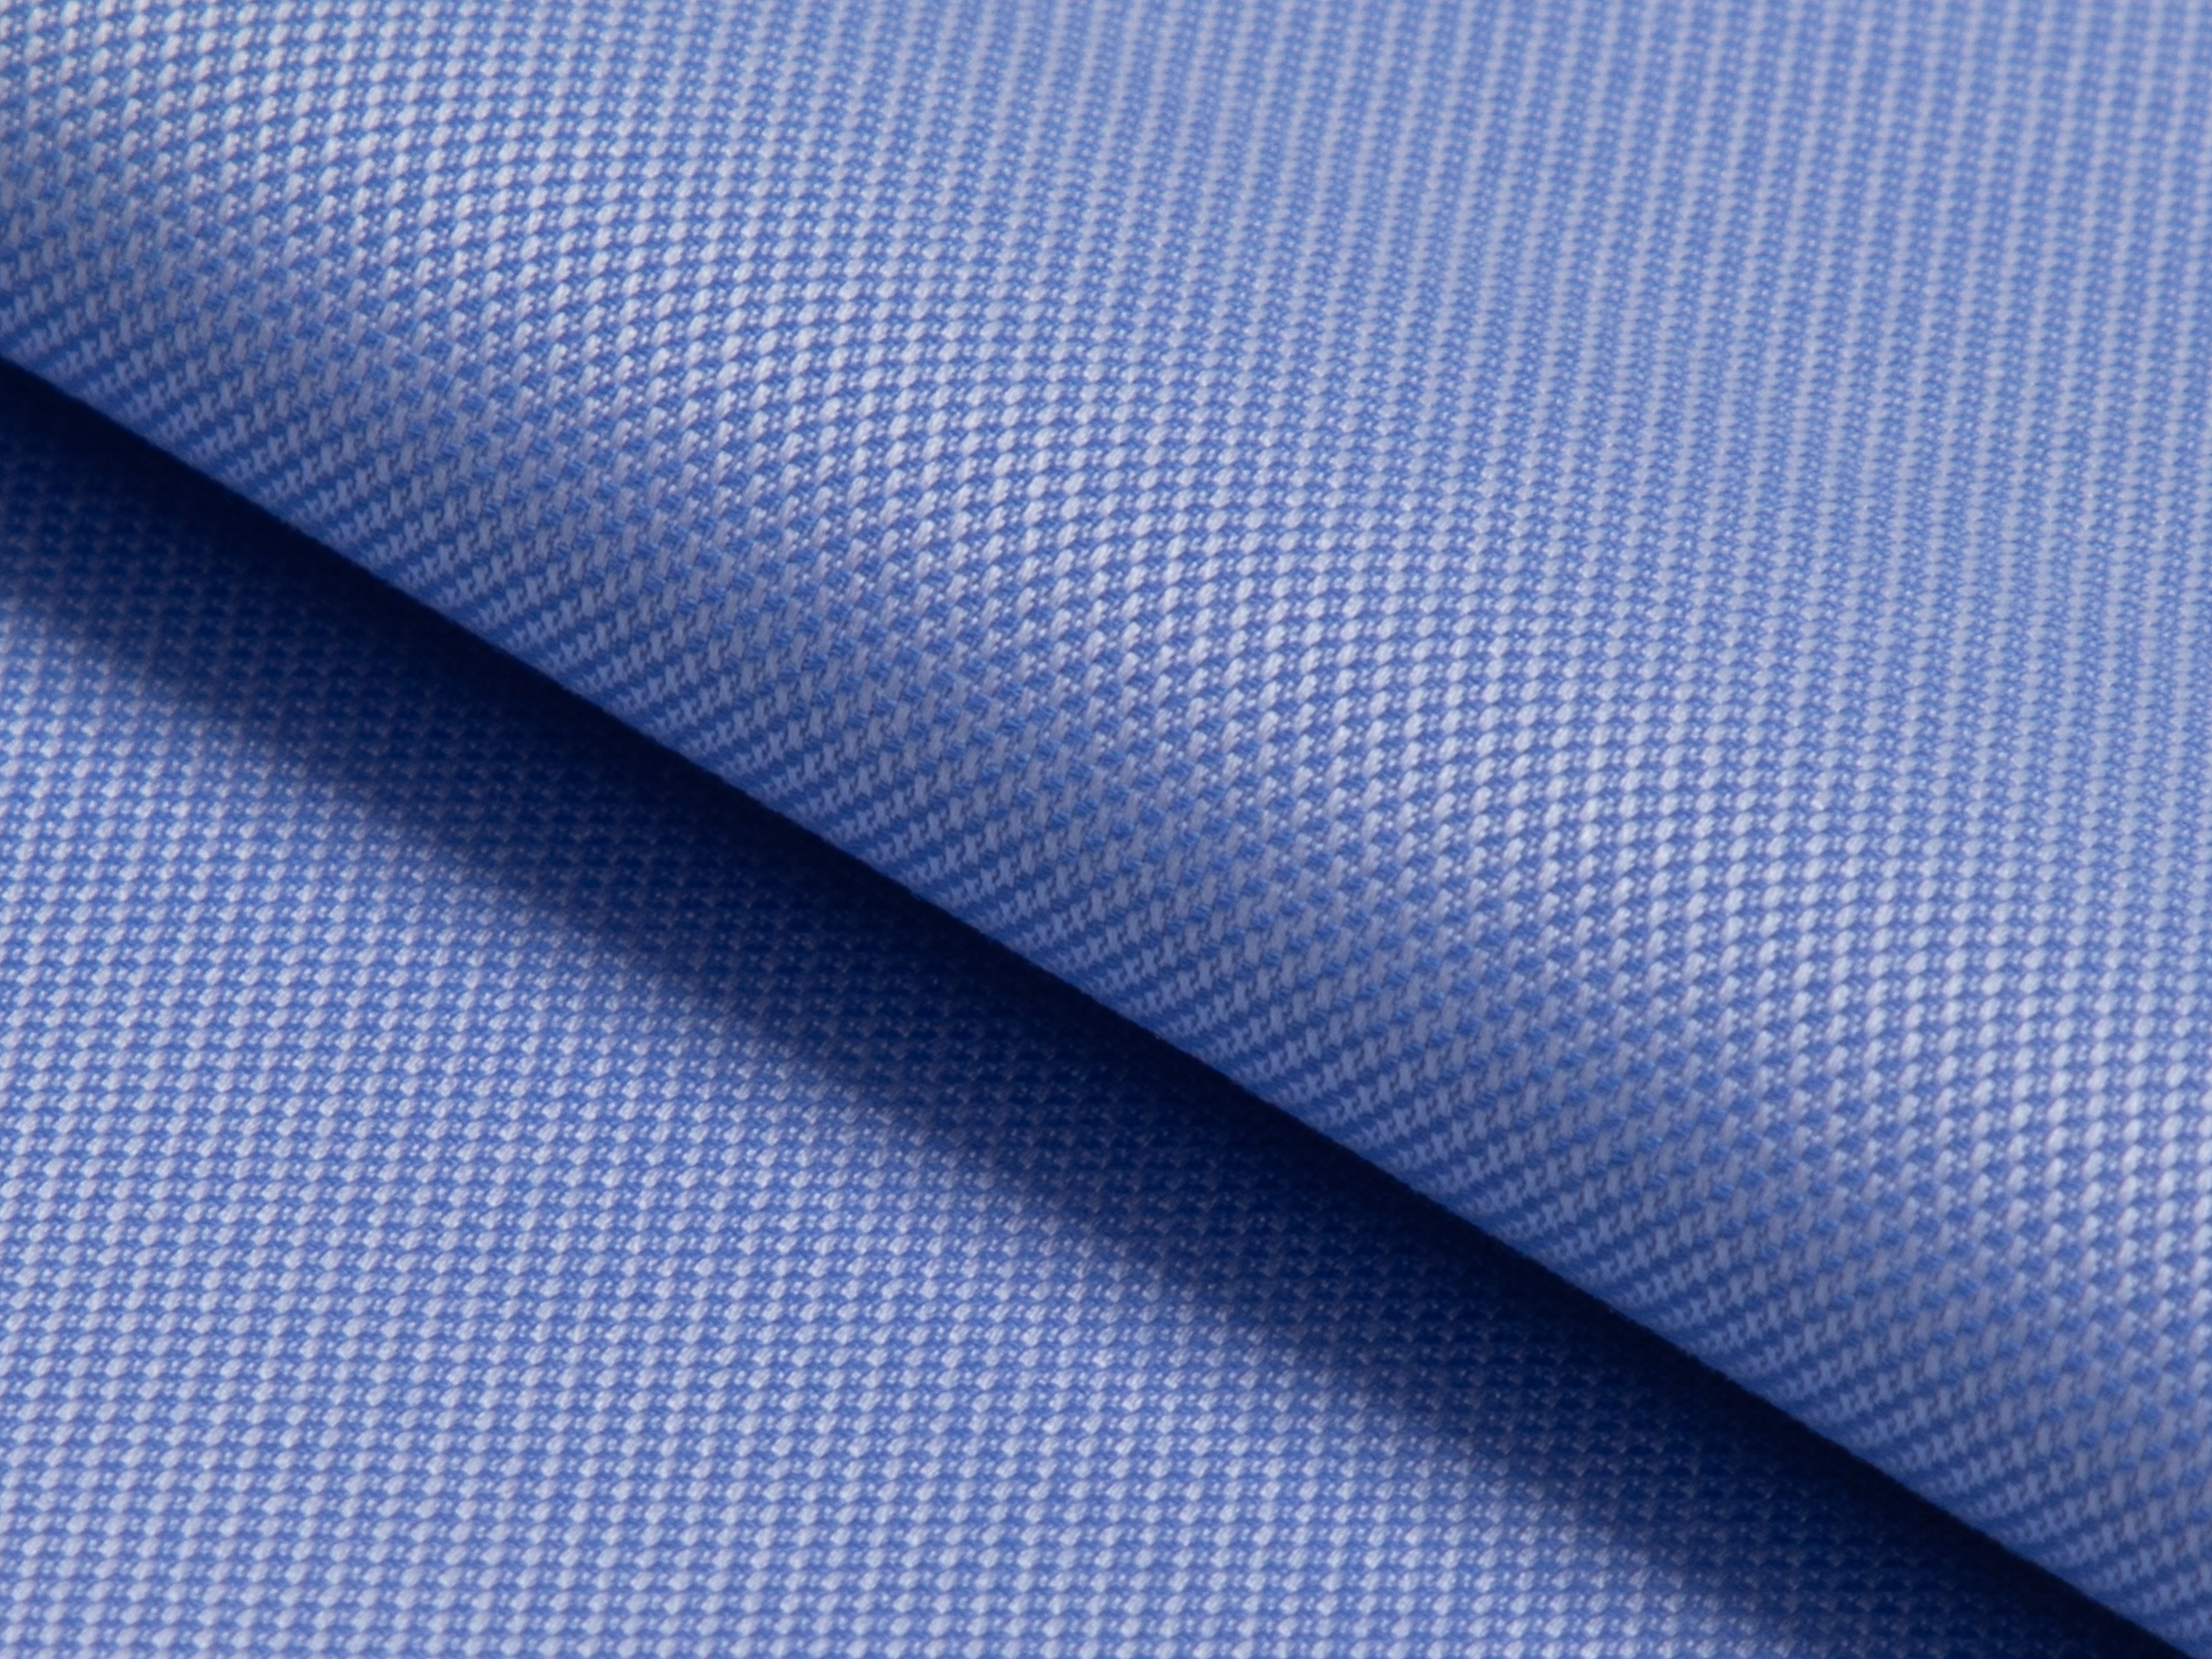 Buy tailor made shirts online - MAYFAIR - Pinpoint Blue